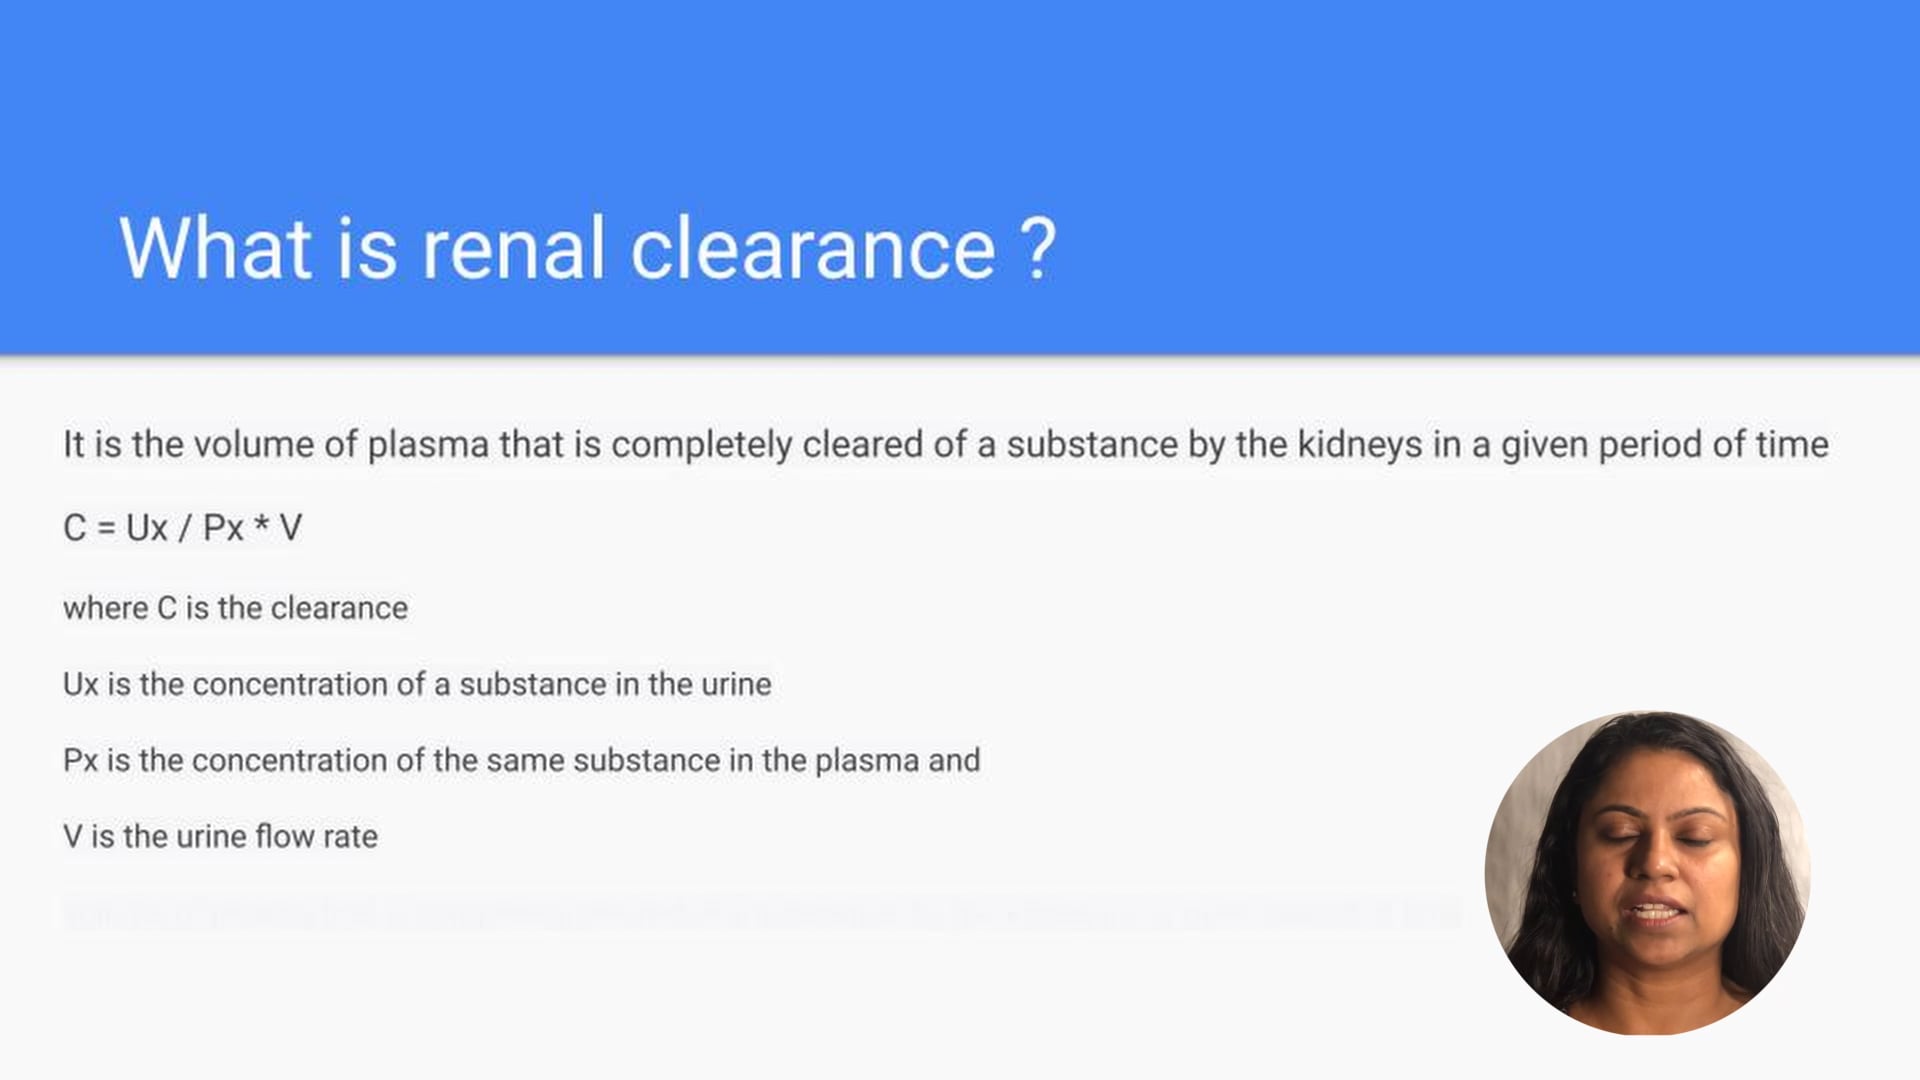 Renal clearance